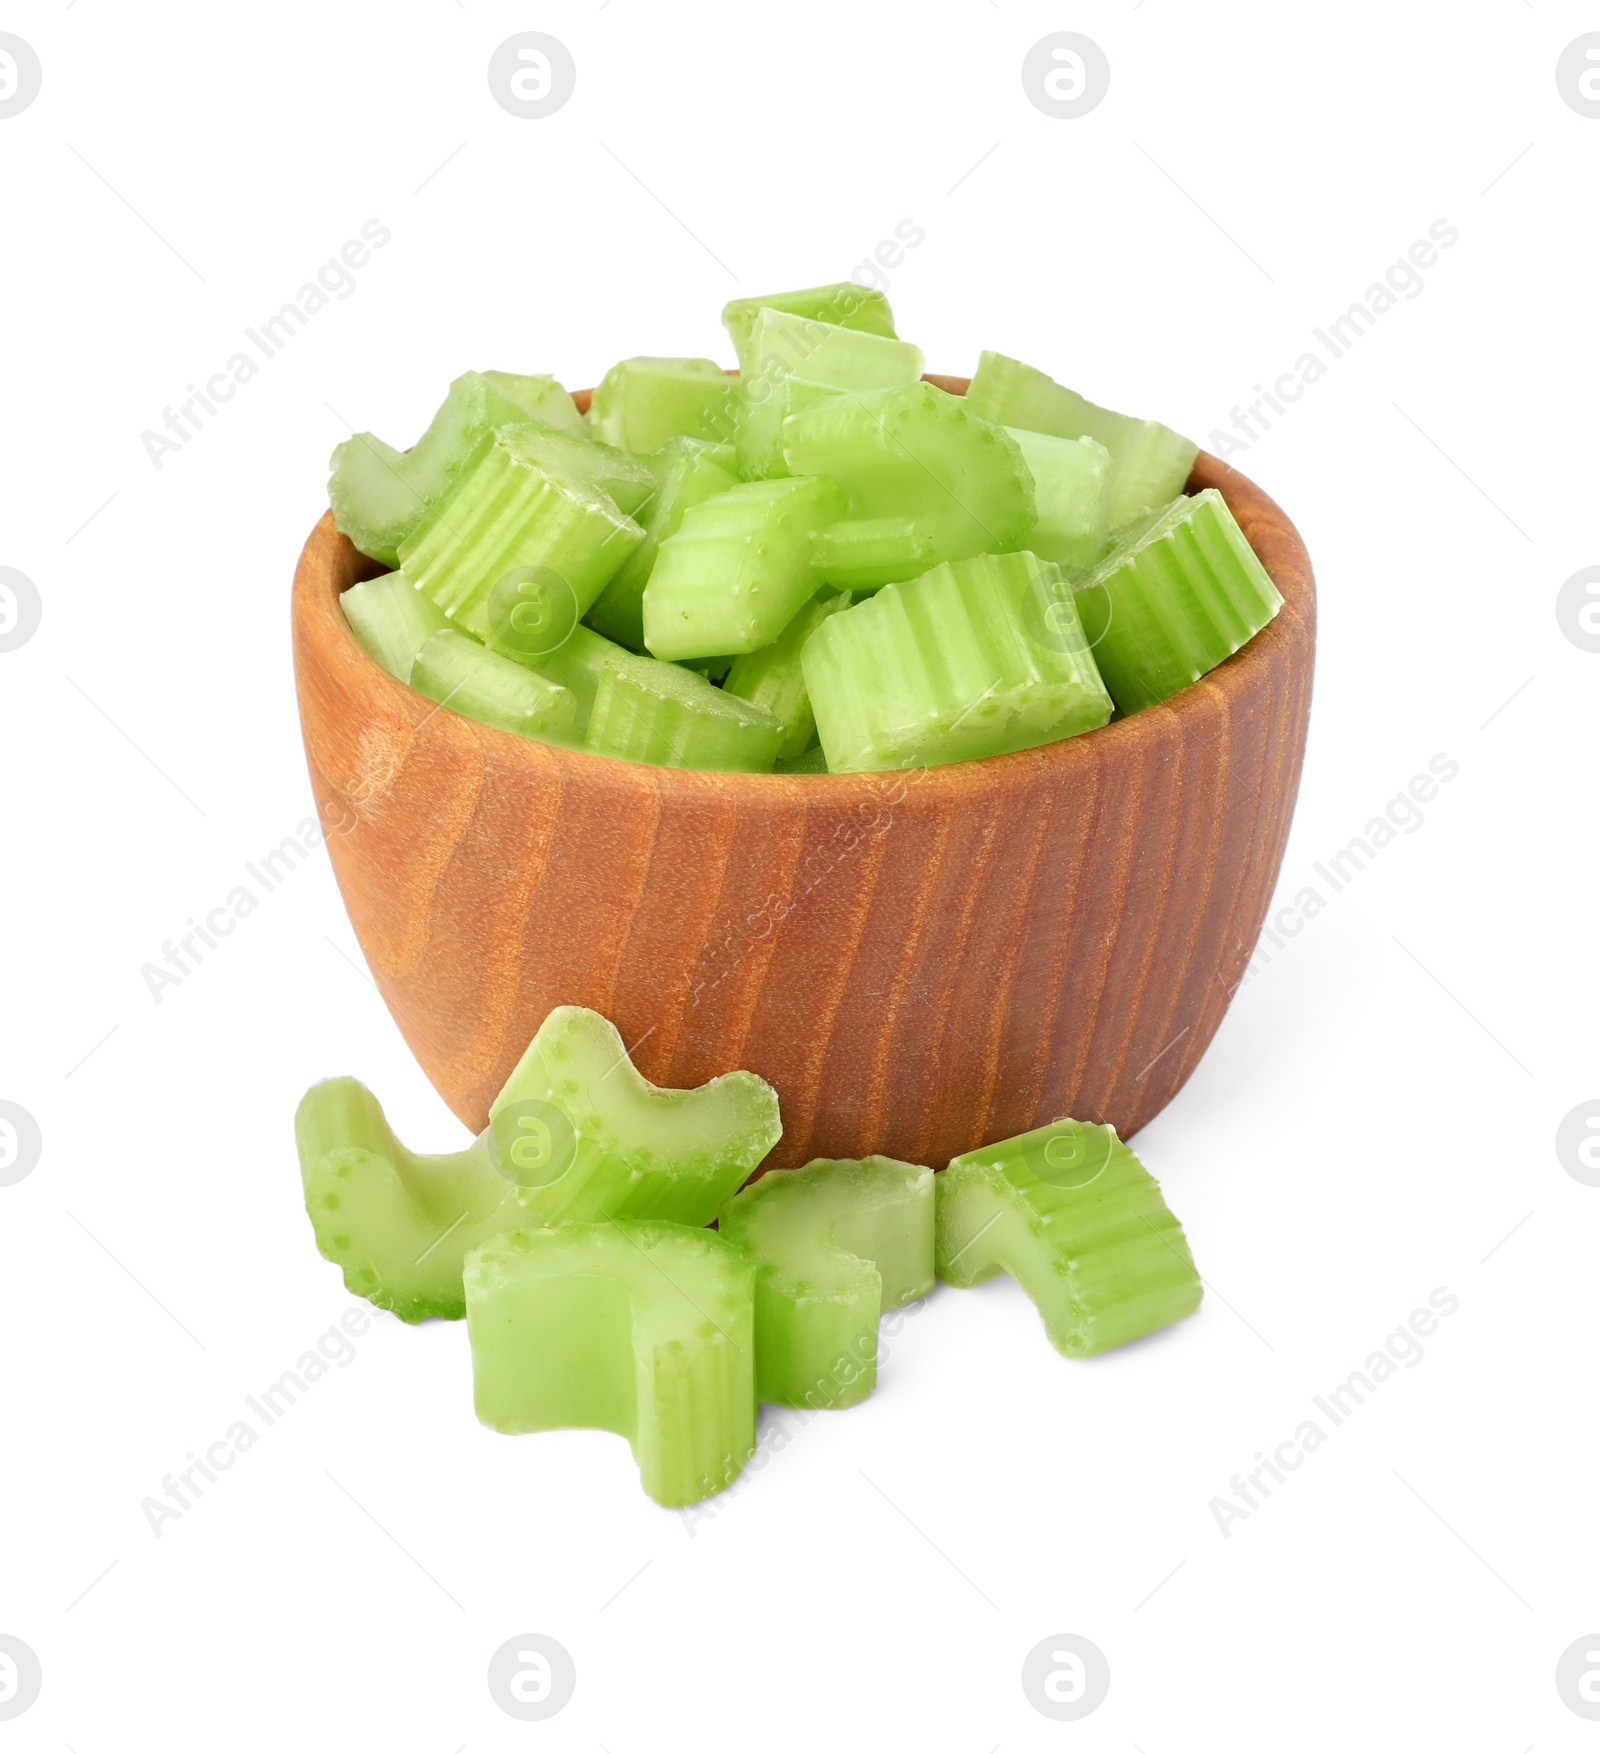 Photo of Wooden bowl of fresh cut celery isolated on white